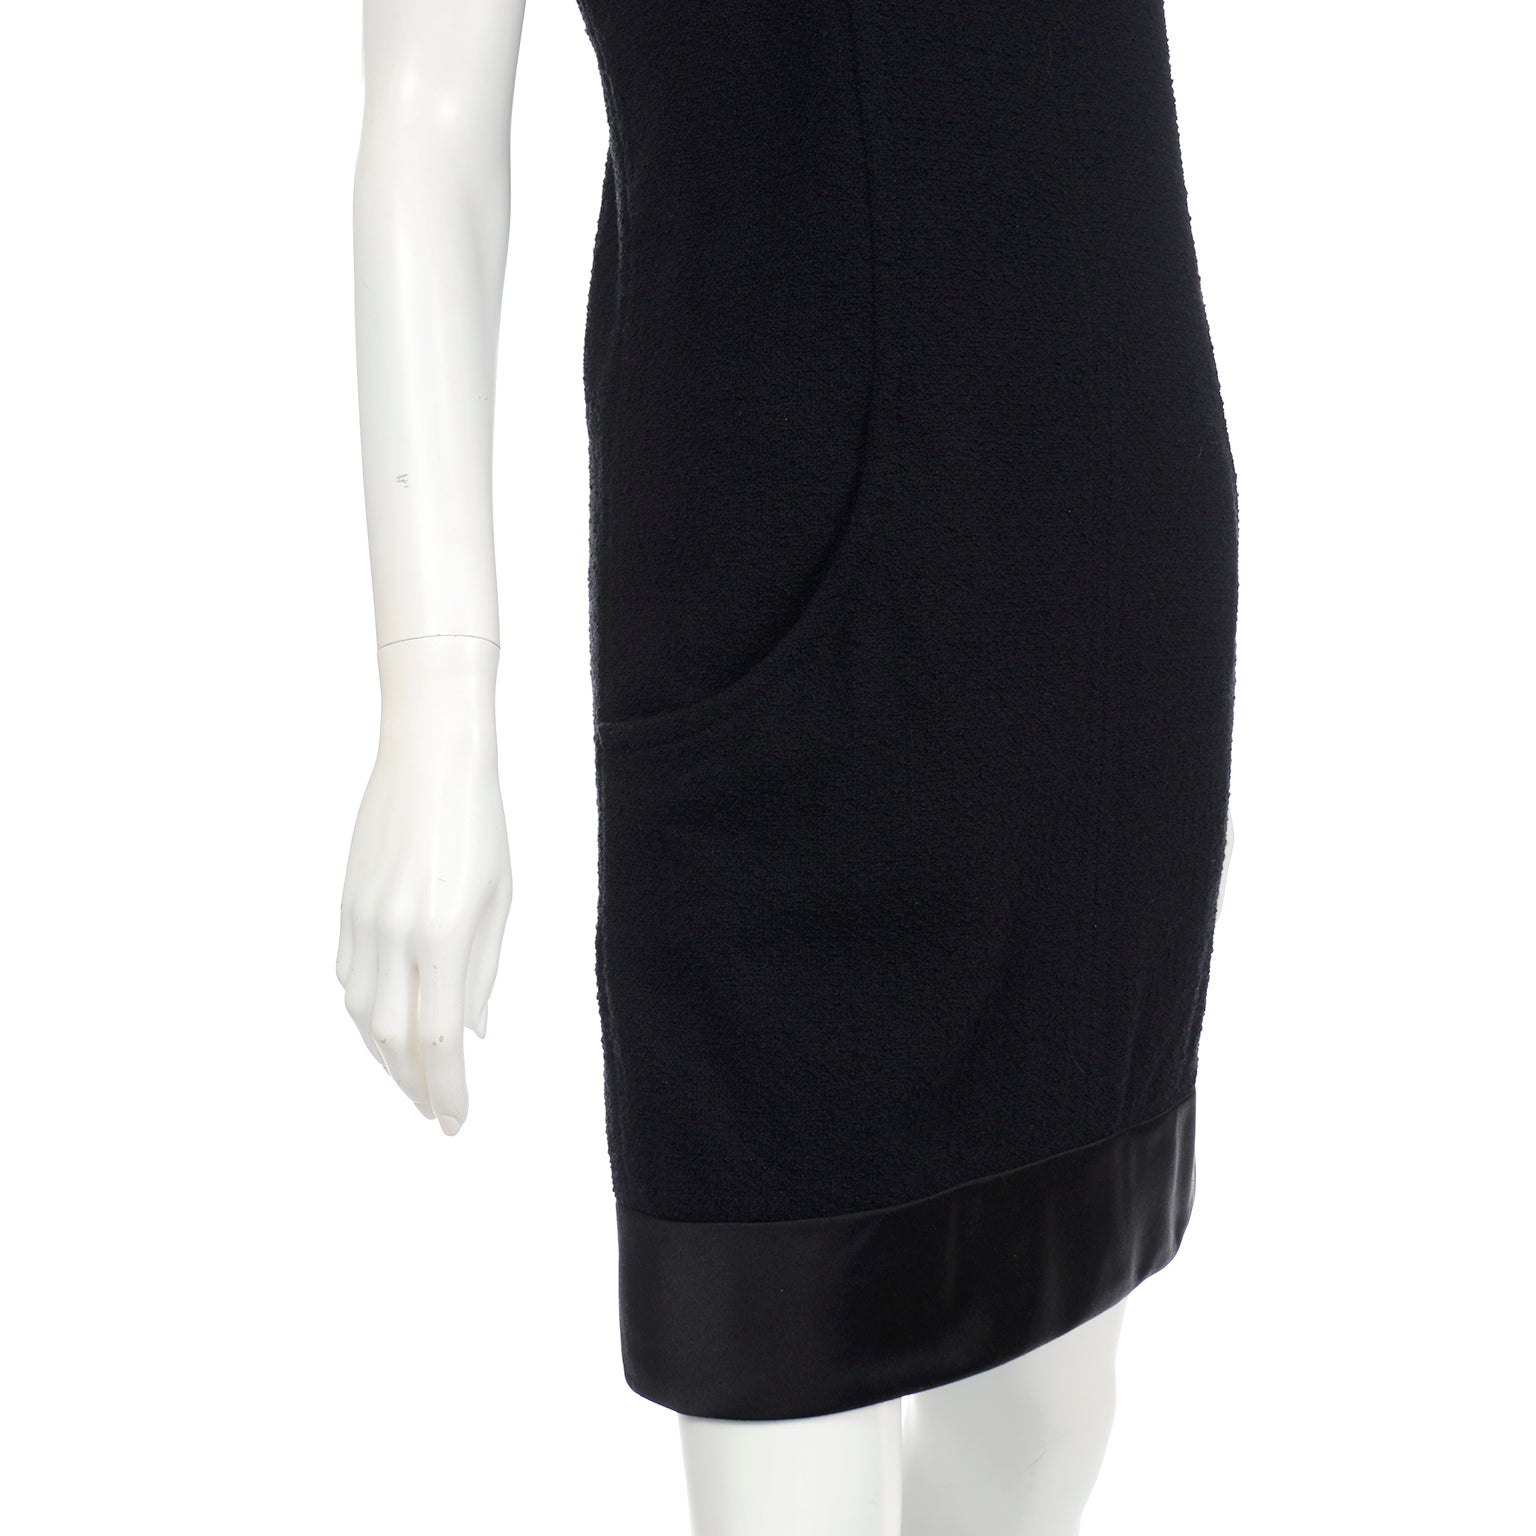 Chanel - Authenticated Skirt - Cashmere Black Abstract for Women, Never Worn